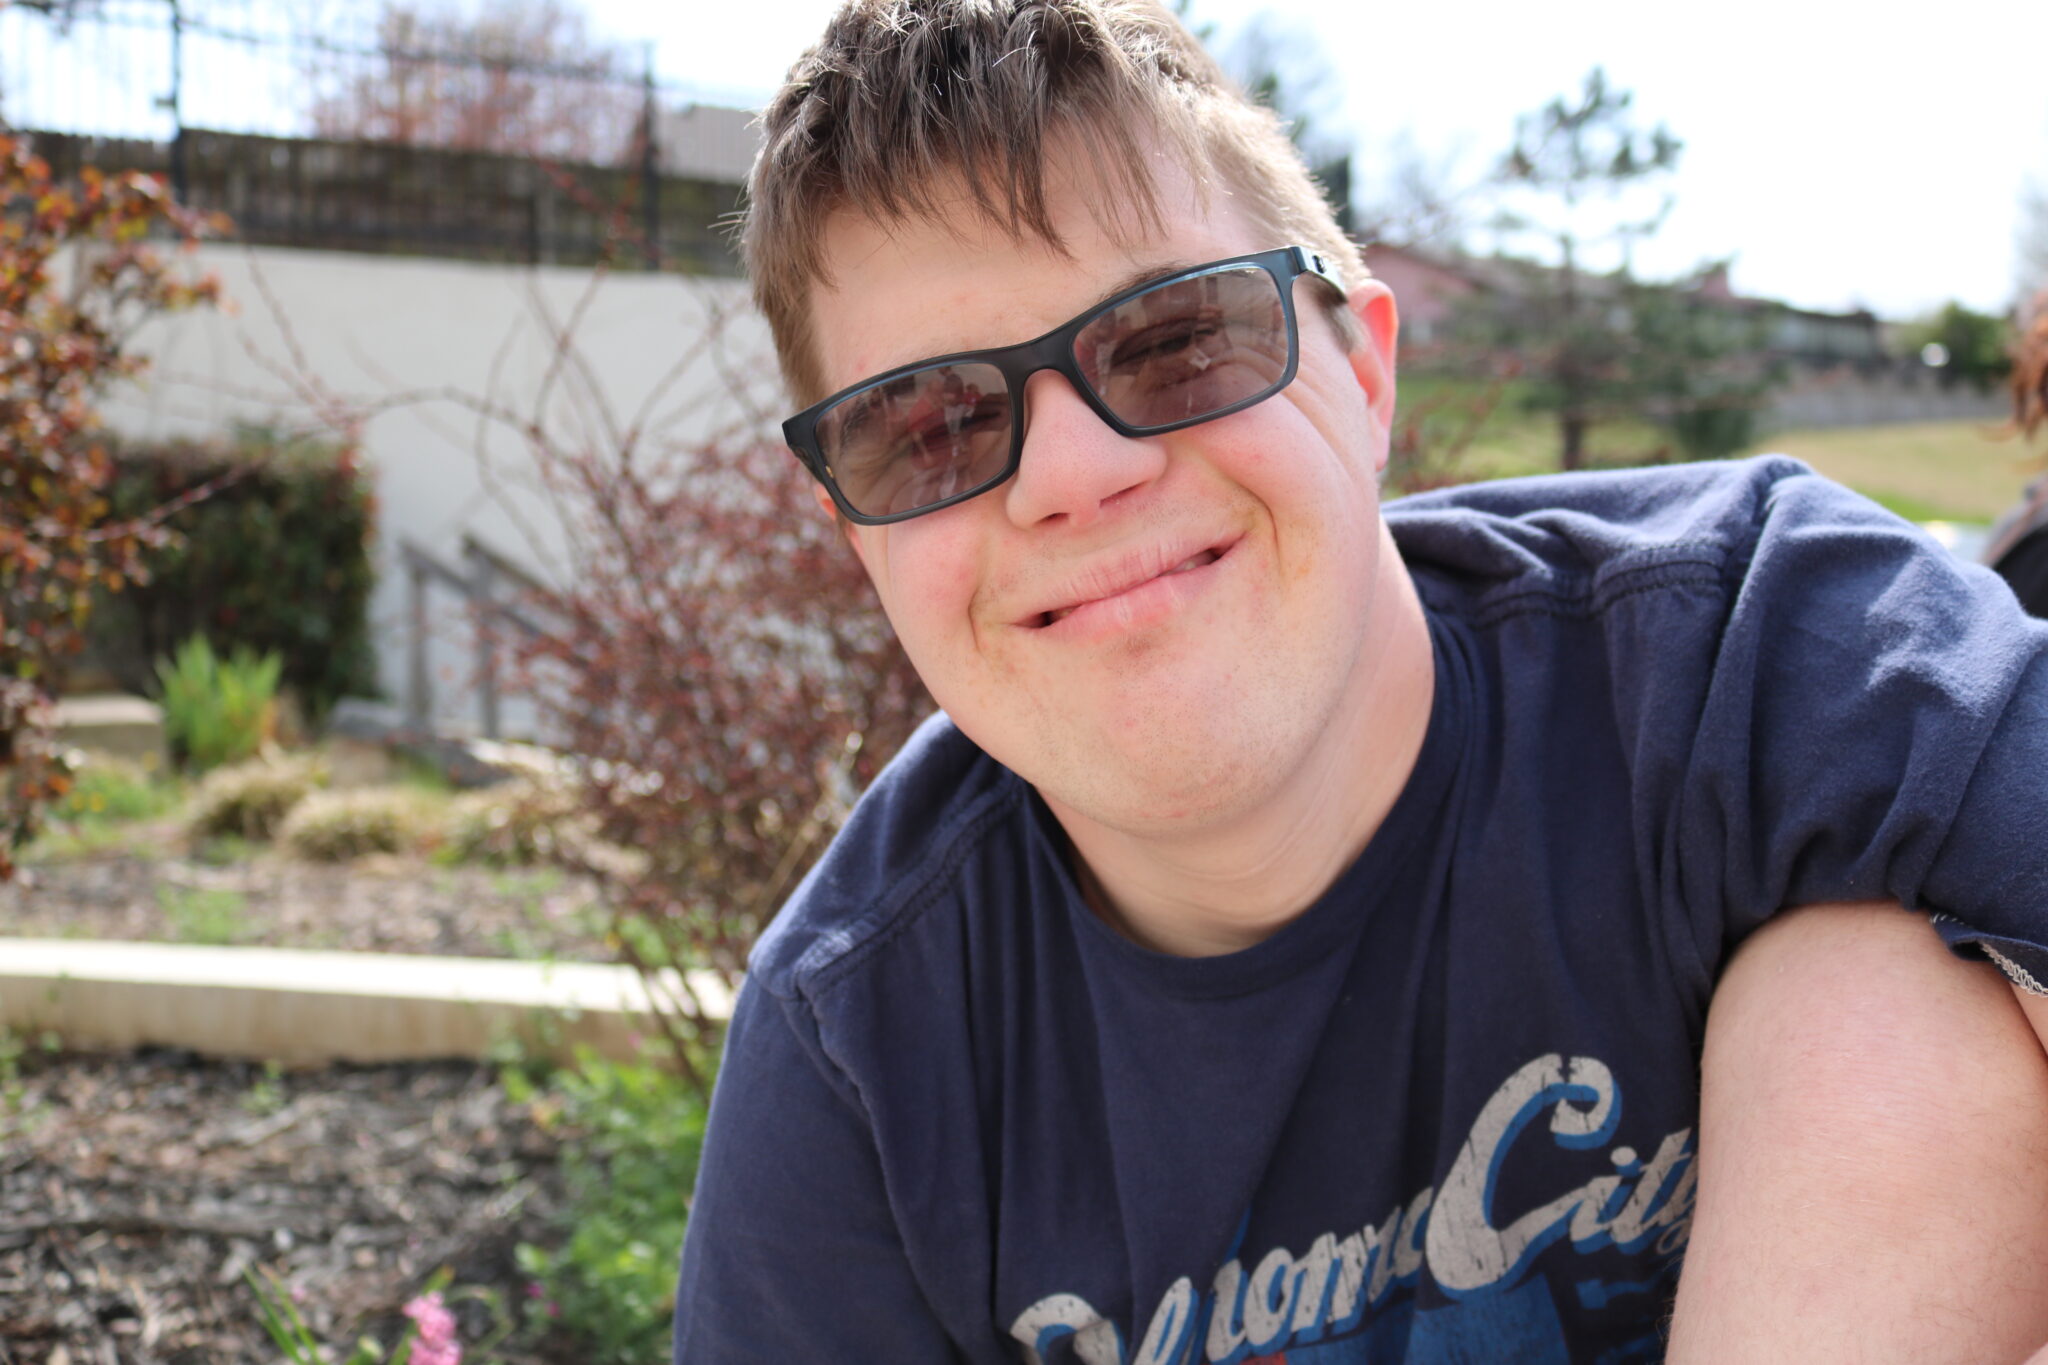 Male student outside, wearing sunglasses, and a blue tee shirt.